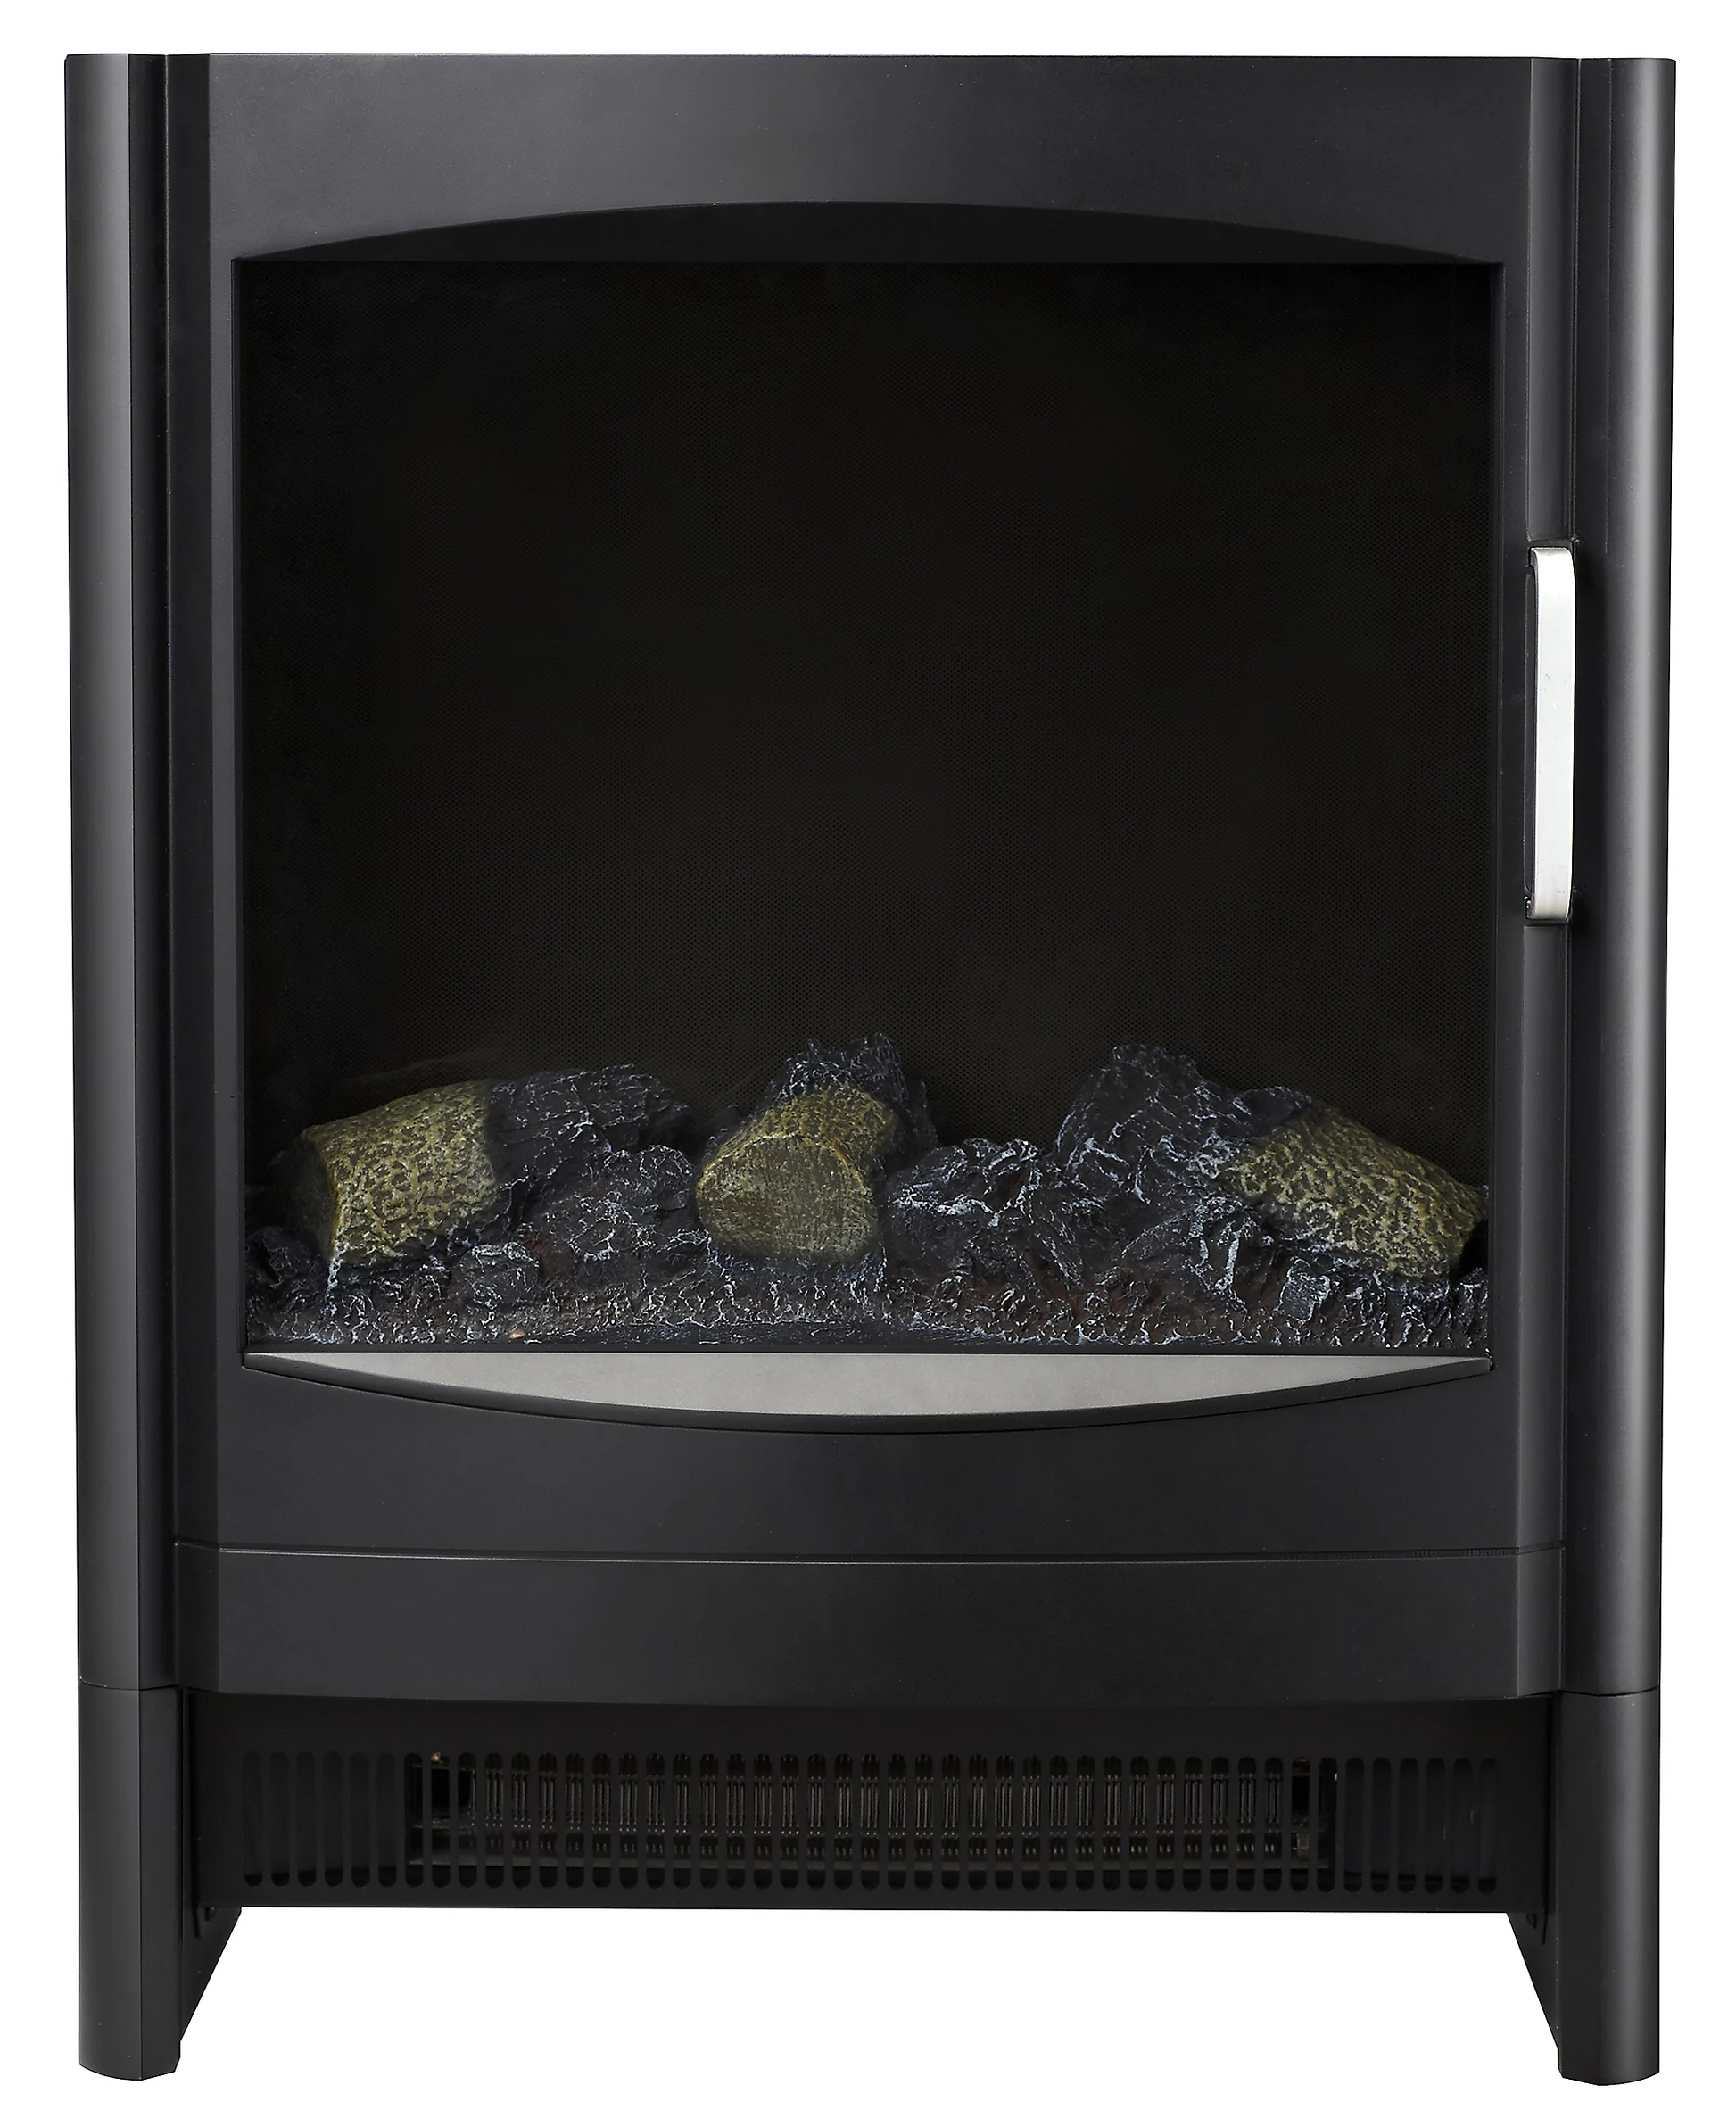 Focal Point Gothenburg 2kW Electric Stove in Black - Second